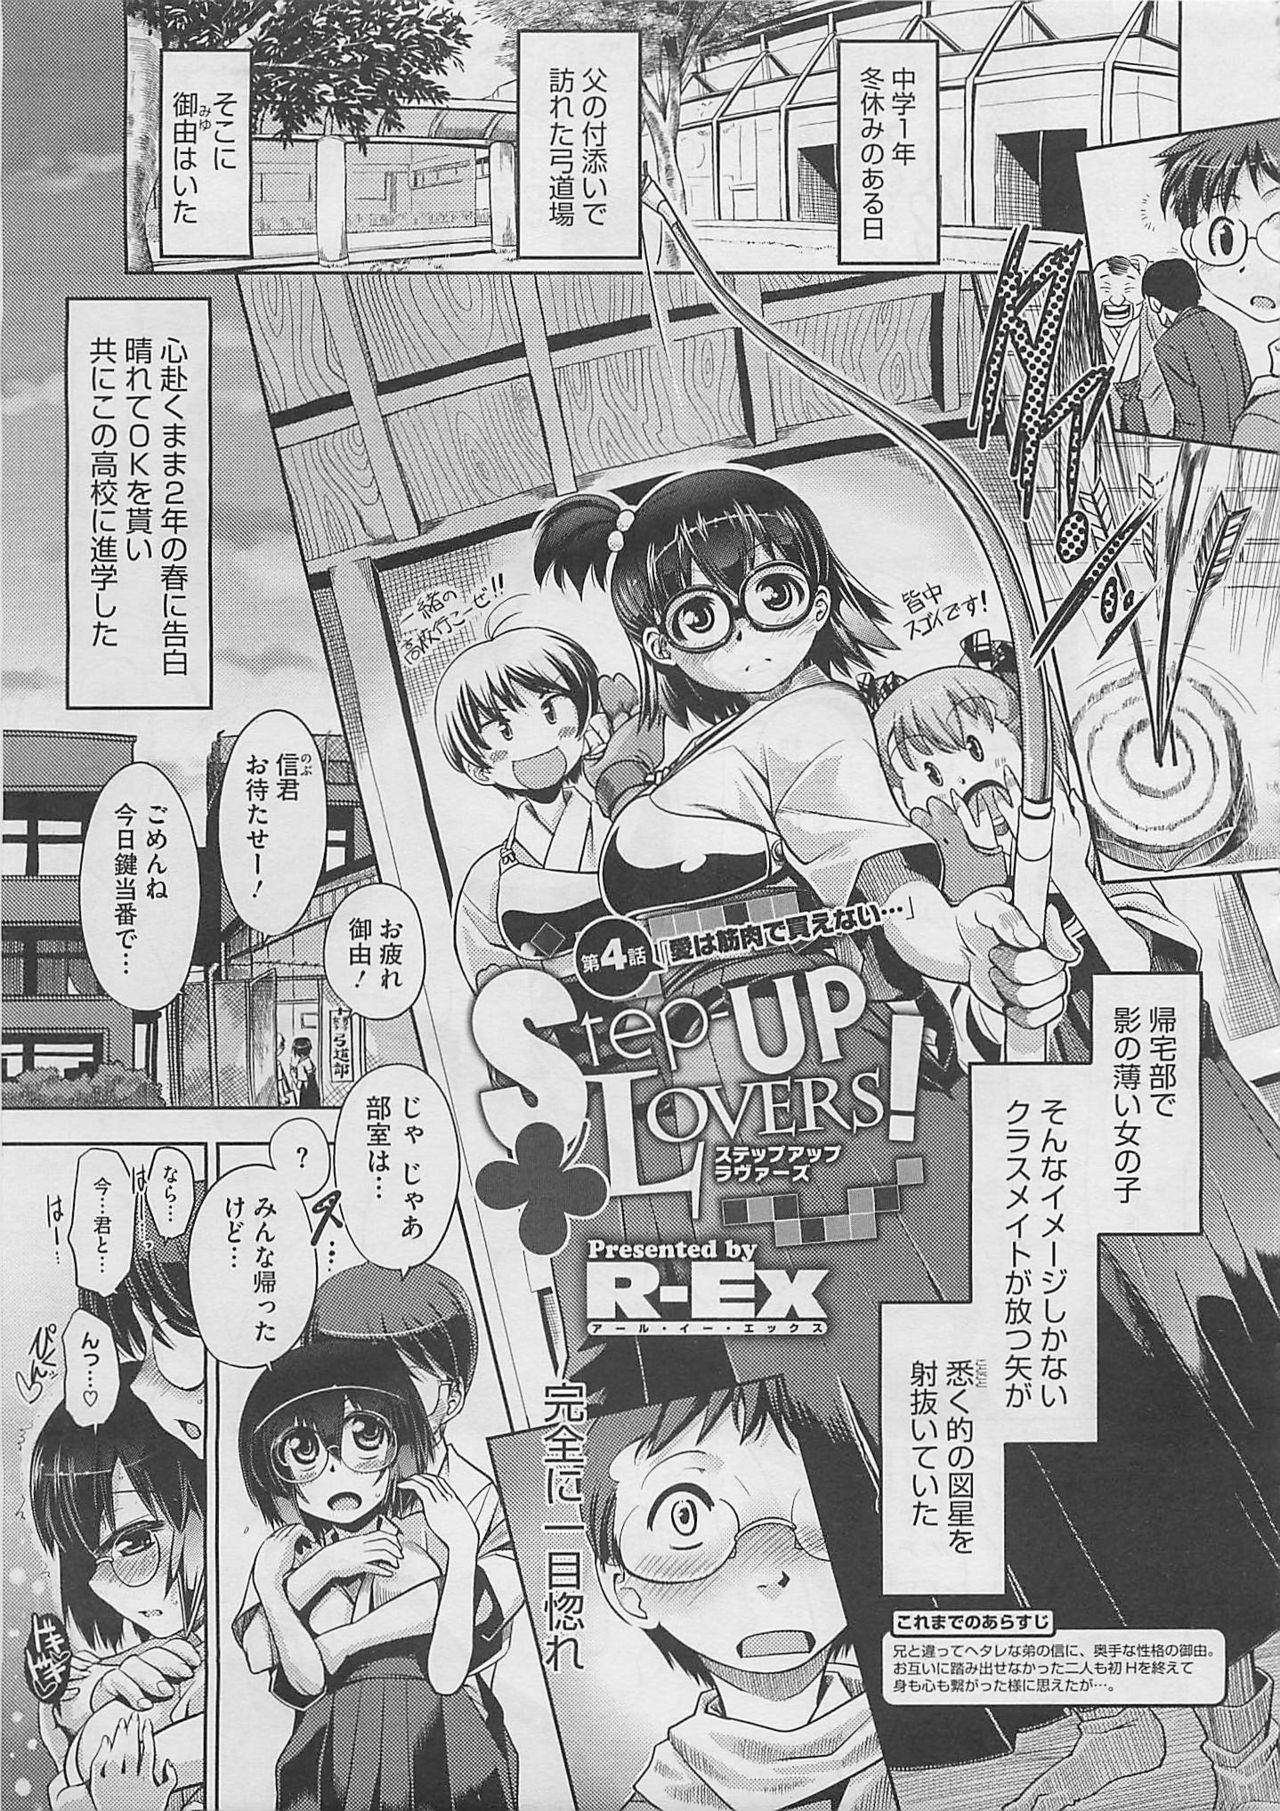 [R-Ex] Step-UP LOVERS! [R-Ex] Step-UP LOVERS! 全8話